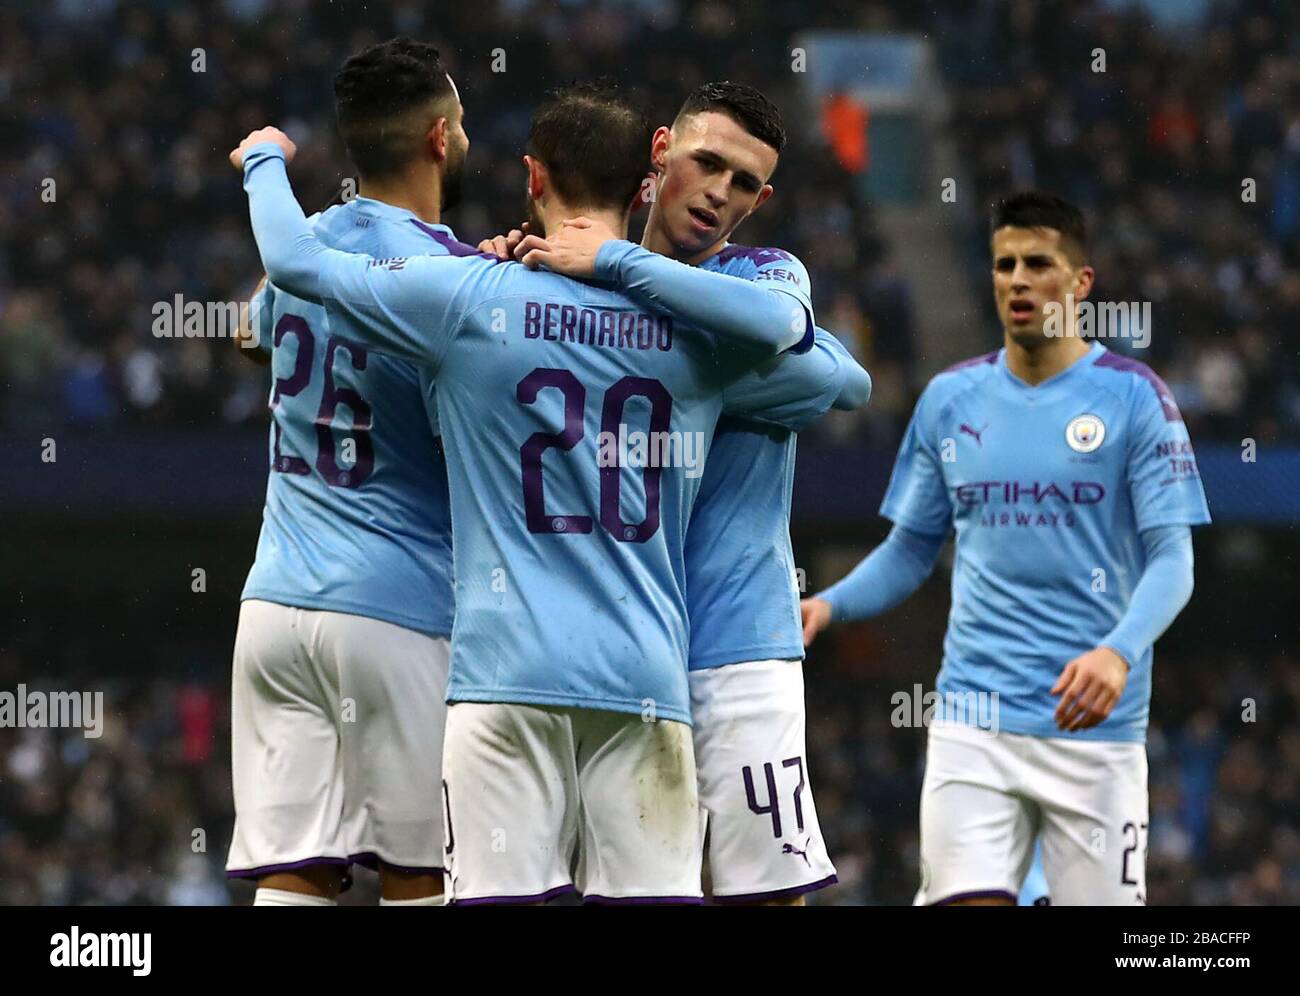 Manchester City's Bernardo Silva (centre) celebrates scoring his side's second goal of the game with team-mates Riyad Mahrez (left) and Phil Foden Stock Photo